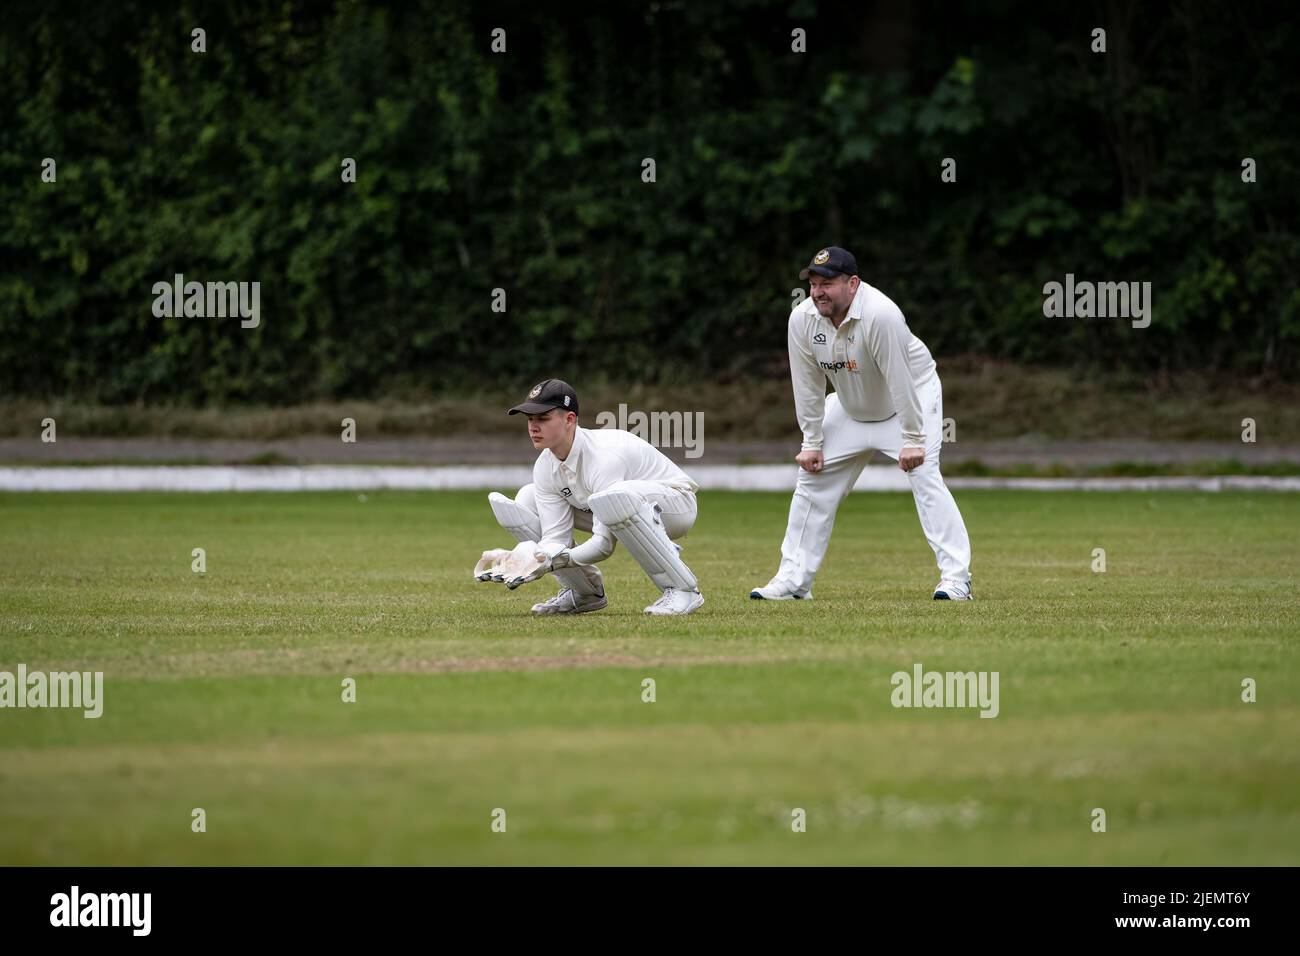 Wicket Keeper crouched behind the stumps with first slip fielder at a weekend village cricket match in Huddersfield, West Yorkshire, England Stock Photo